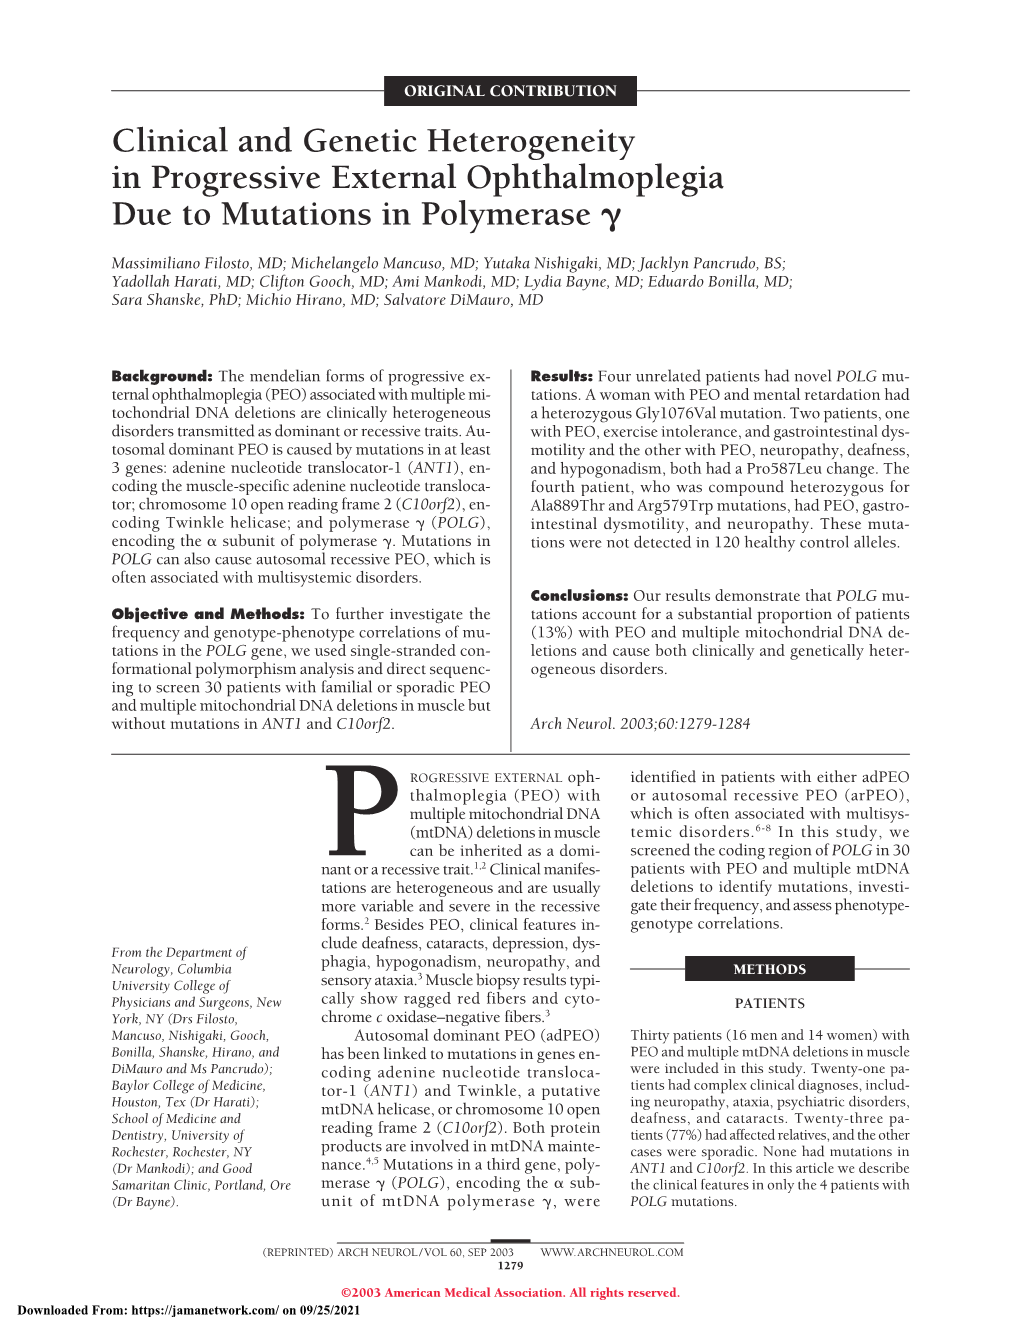 Clinical and Genetic Heterogeneity in Progressive External Ophthalmoplegia Due to Mutations in Polymerase ␥